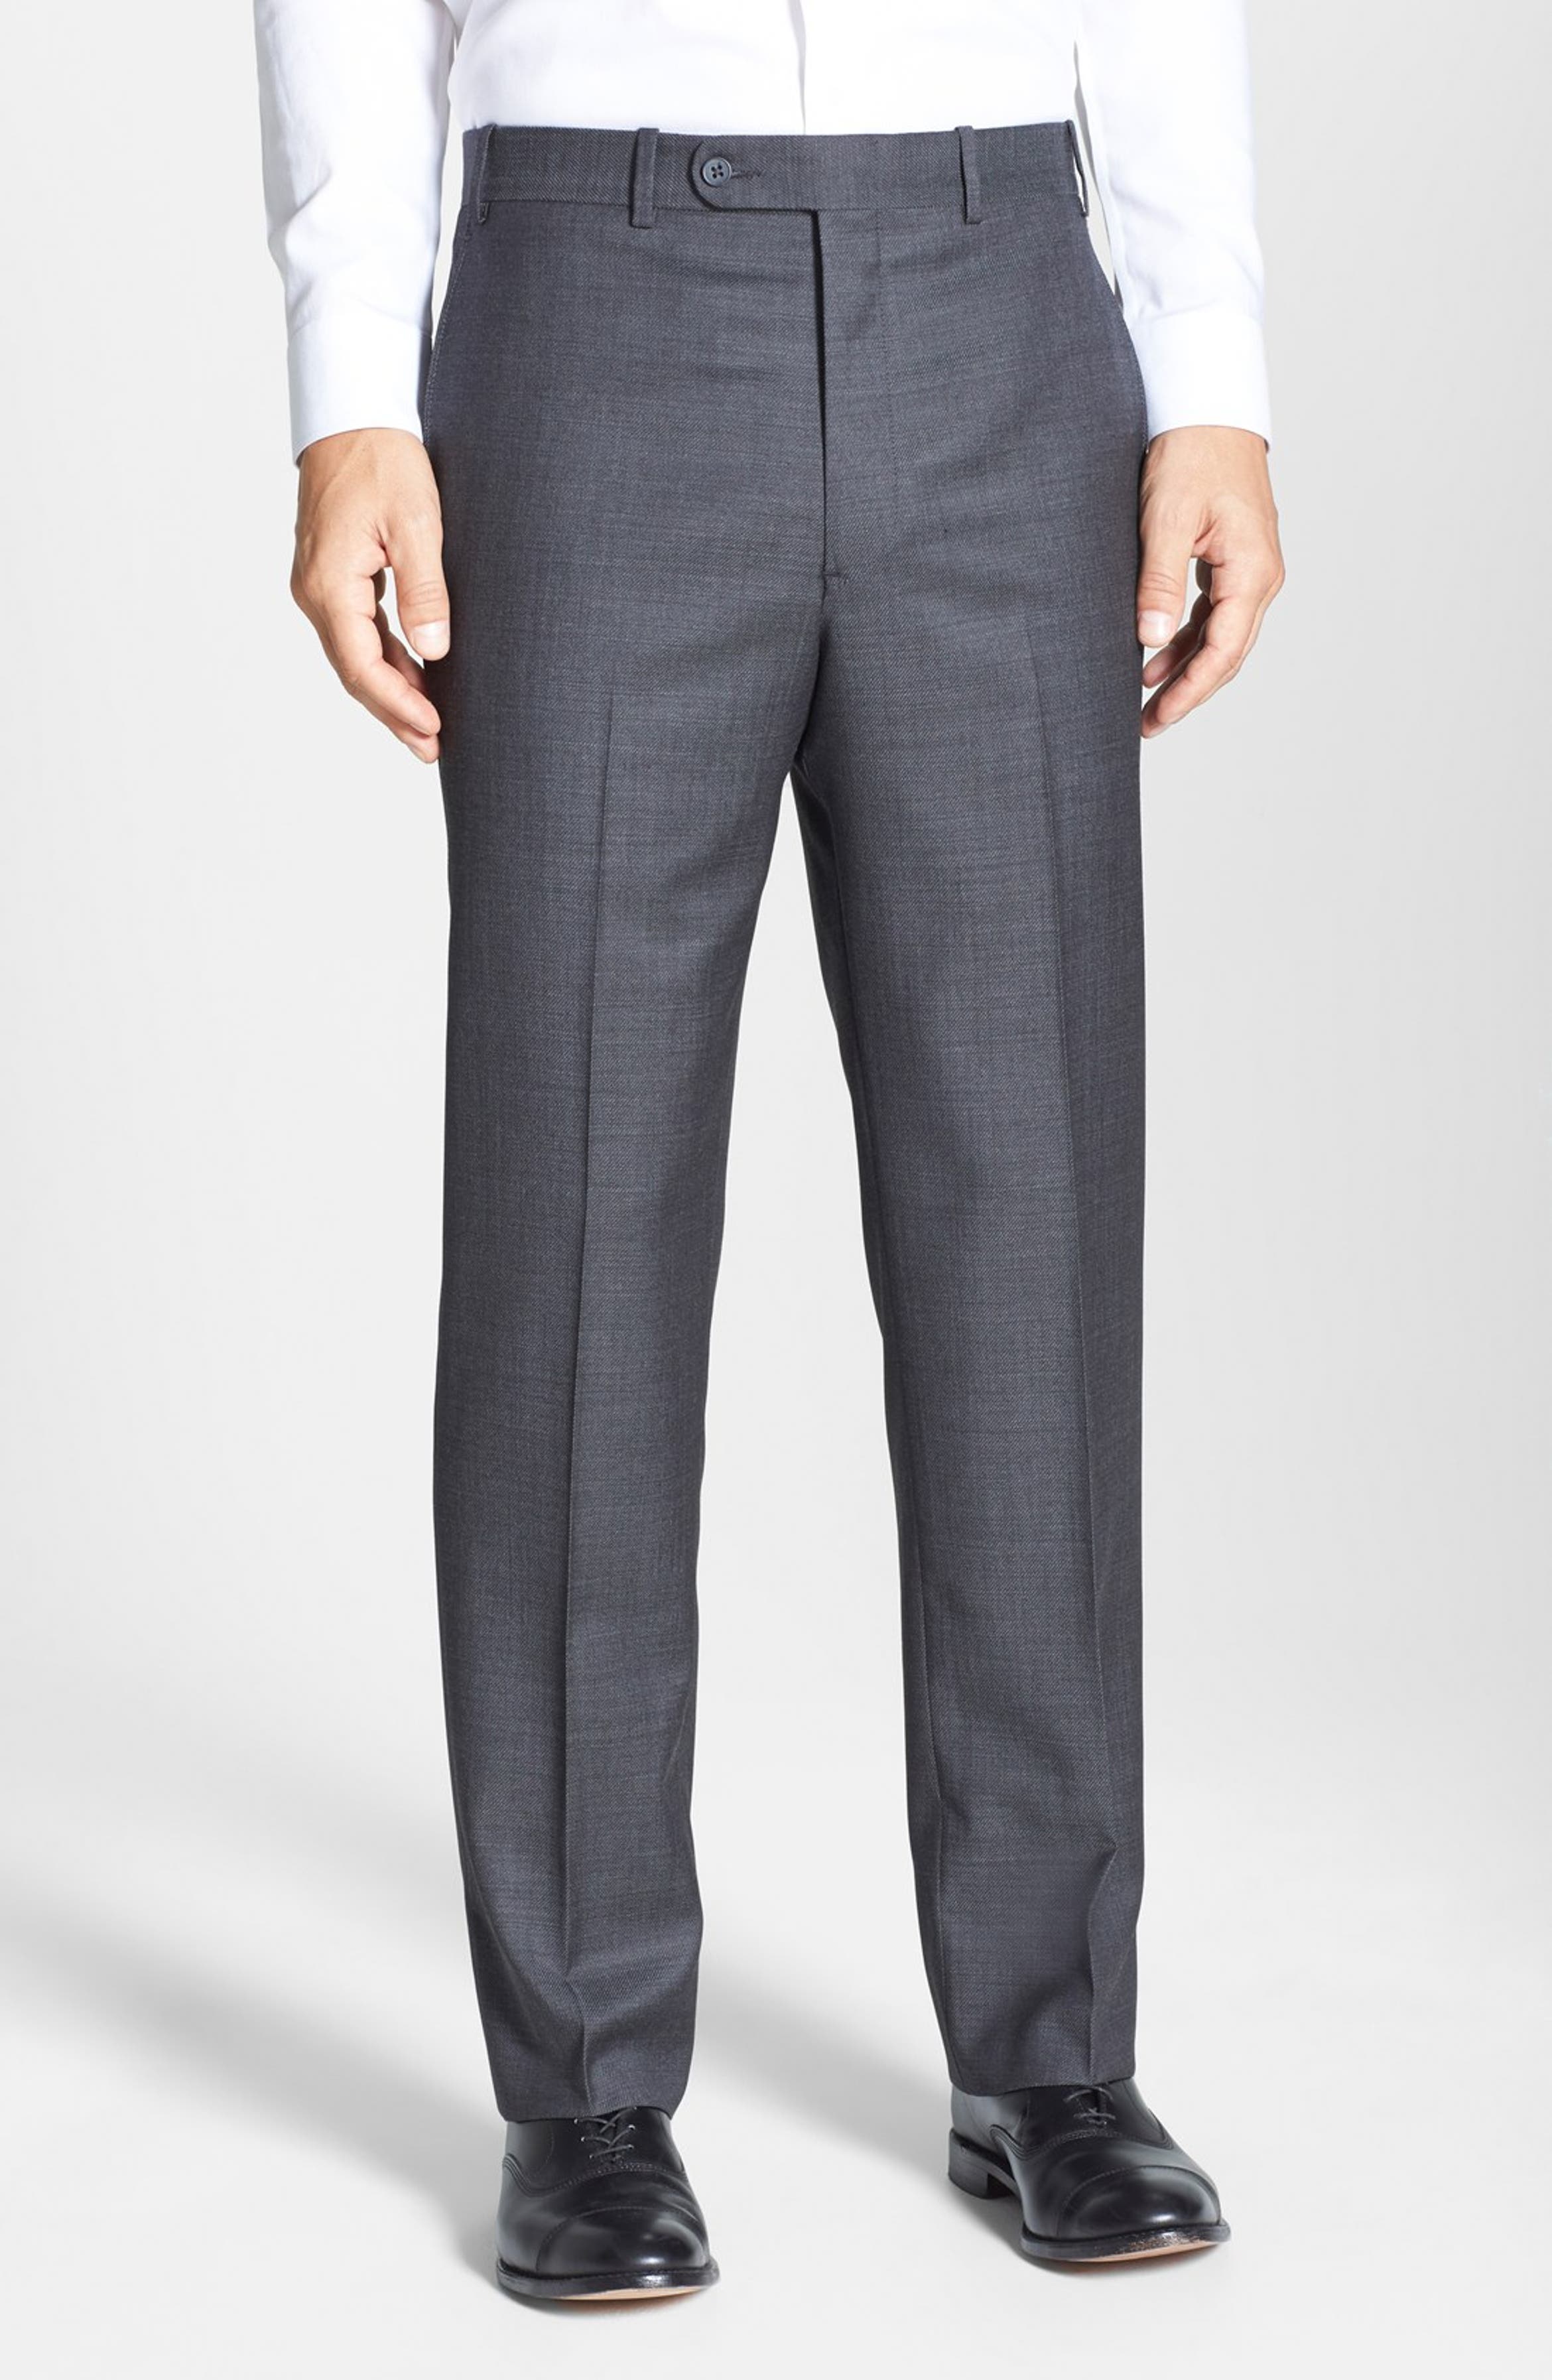 JB Britches 'Torino' Flat Front Wool Trousers | Nordstrom